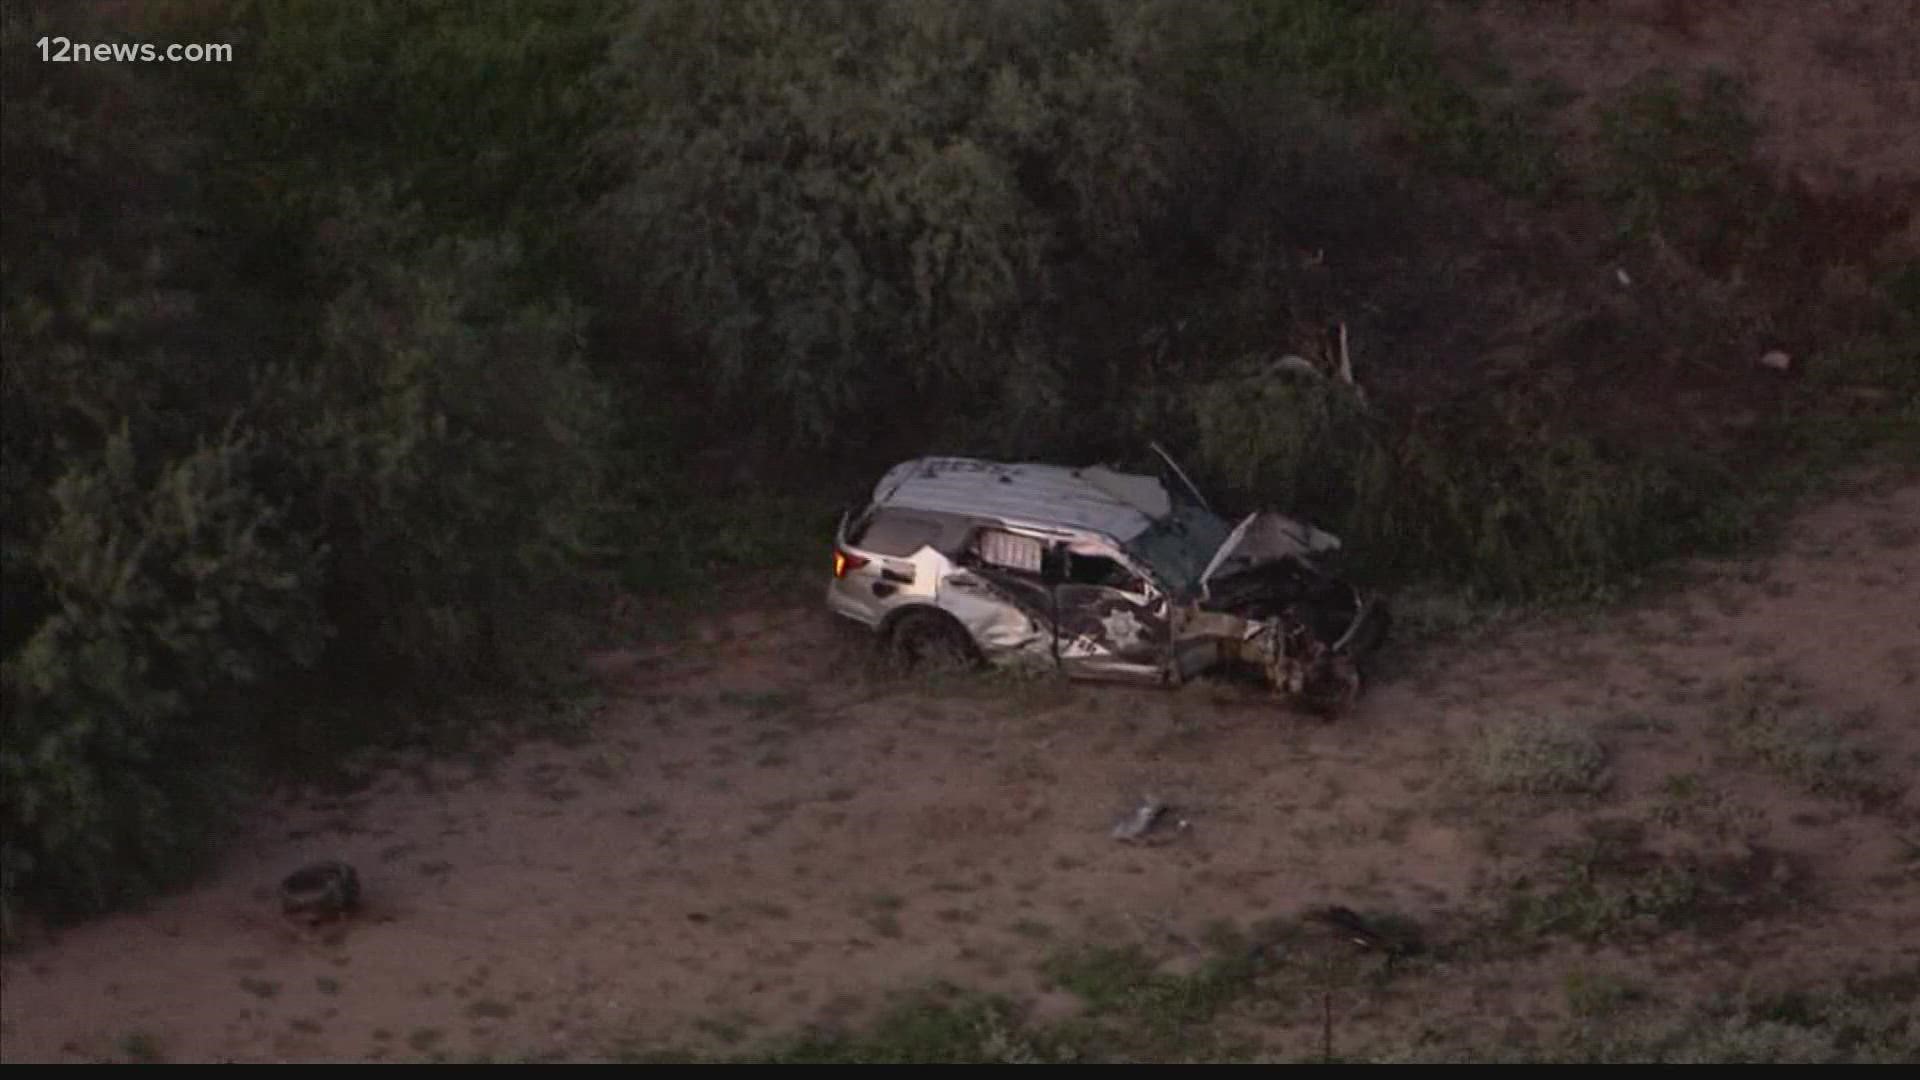 DPS said that, while responding to a call, a trooper crashed near Shea Boulevard.